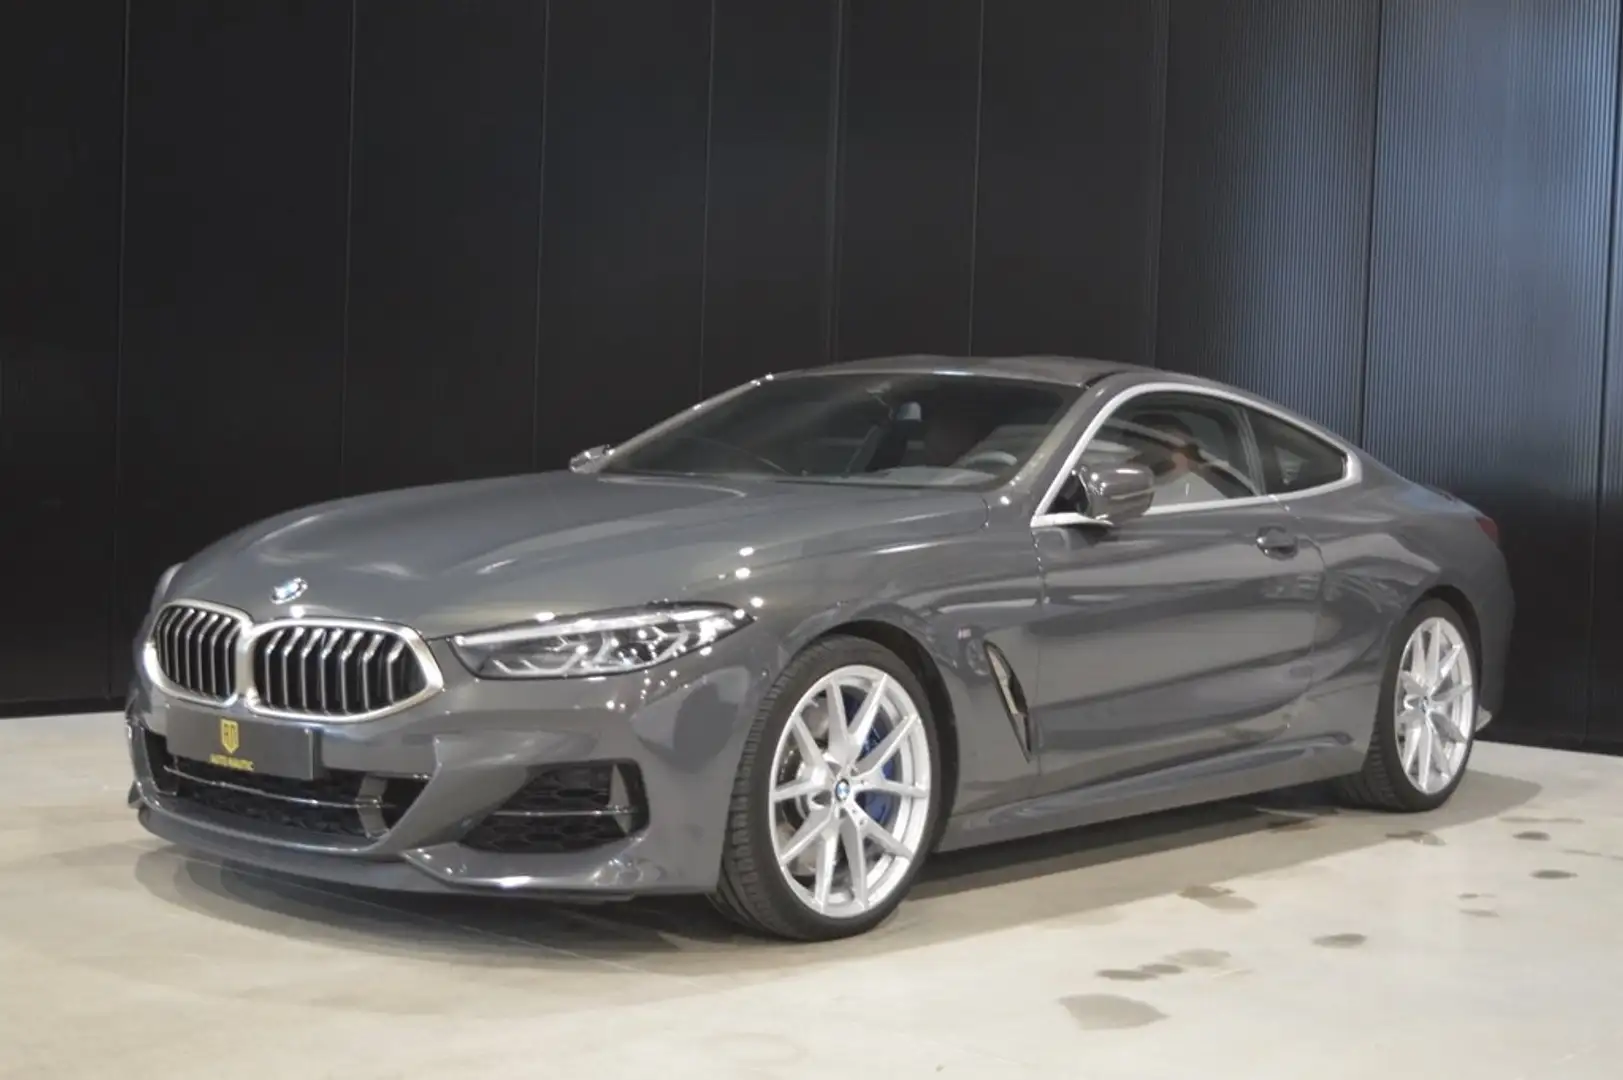 BMW 850 i xdrive 64.000 km ! Carbon pack ! Top condition ! Grey - 1